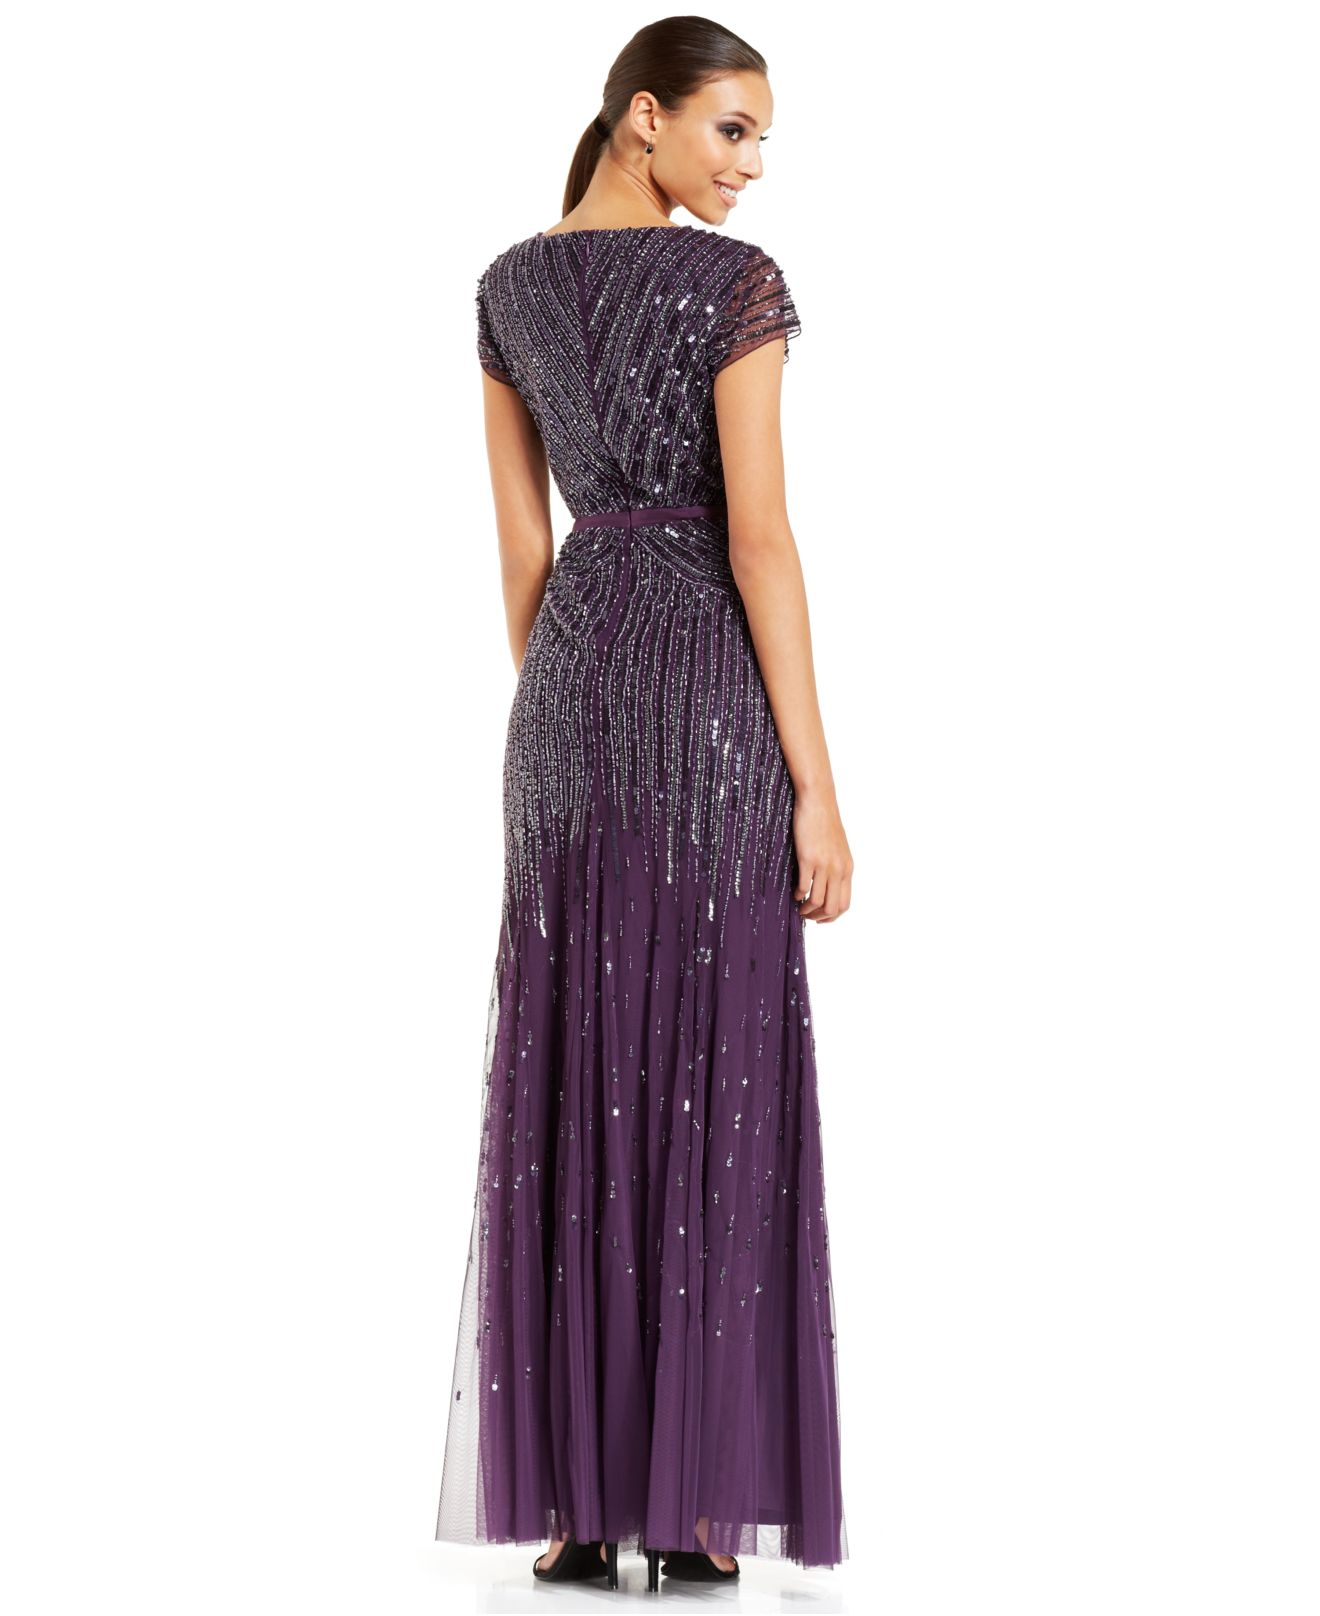 Adrianna Papell Adrianna Petite Papell Cap-Sleeve Sequined Gown in Purple -  Lyst